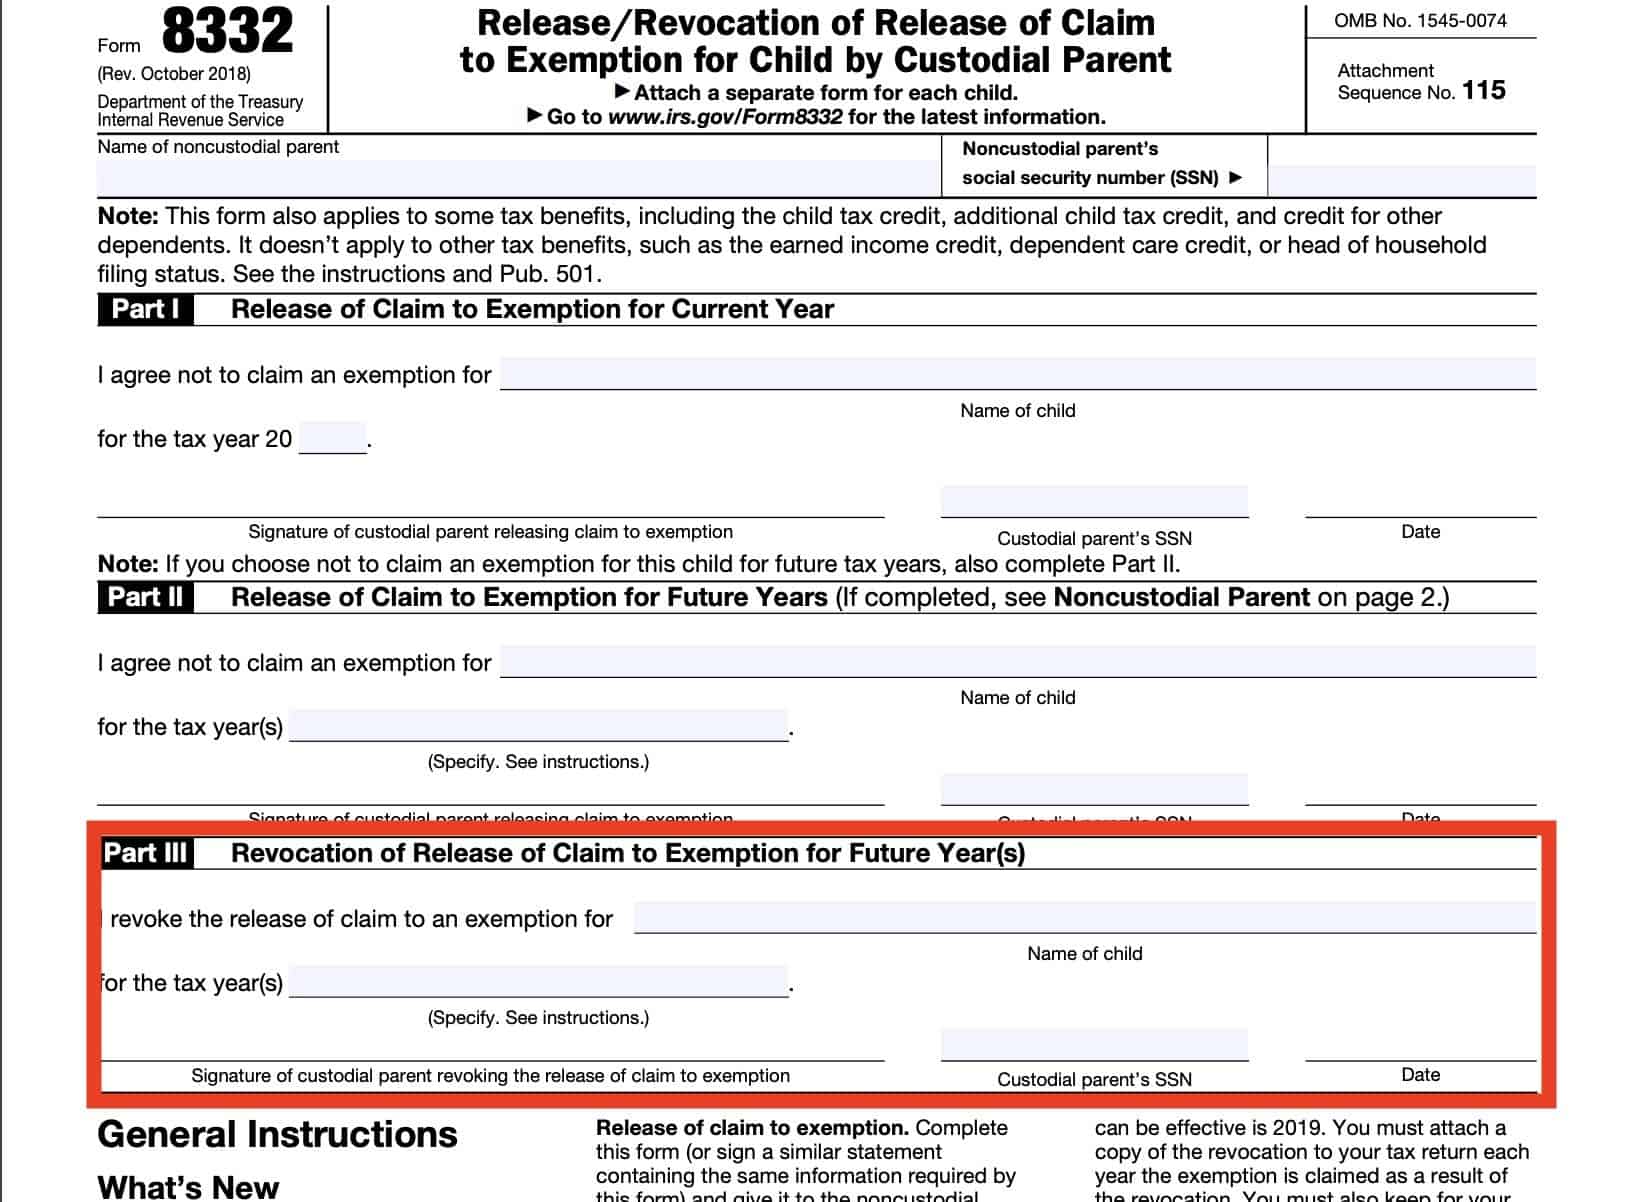 form 8332, part iii: revocation of prior release of claim of exemption for future years